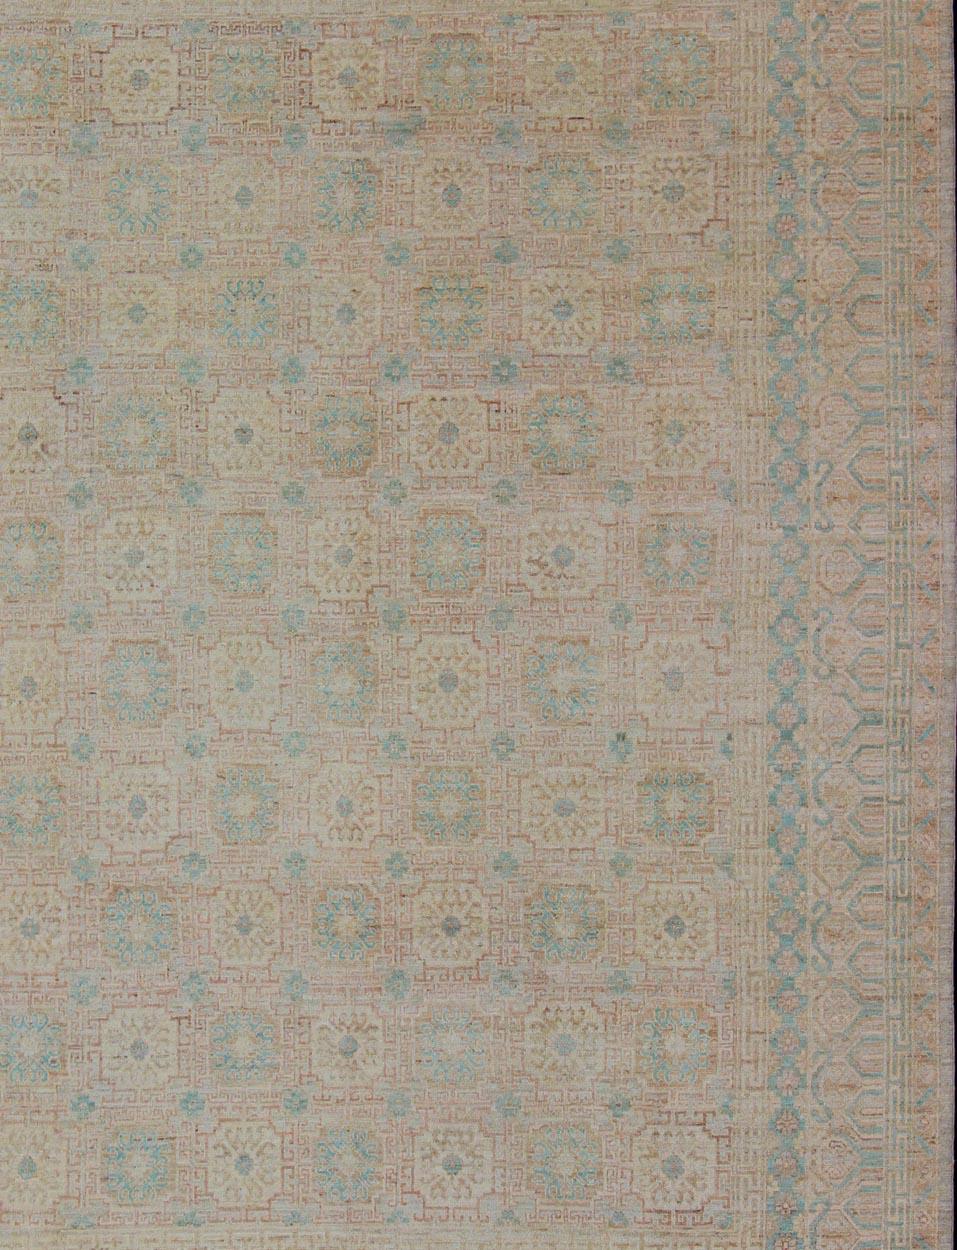 Khotan Design rug with Geometric Medallions in turquoise and tan, Geometric Khotan. Keivan Woven Arts, rug MP-1903-10235, country of origin / type: Afghanistan / Khotan

This Khotan features multi-medallion geometric design flanked by a repeating